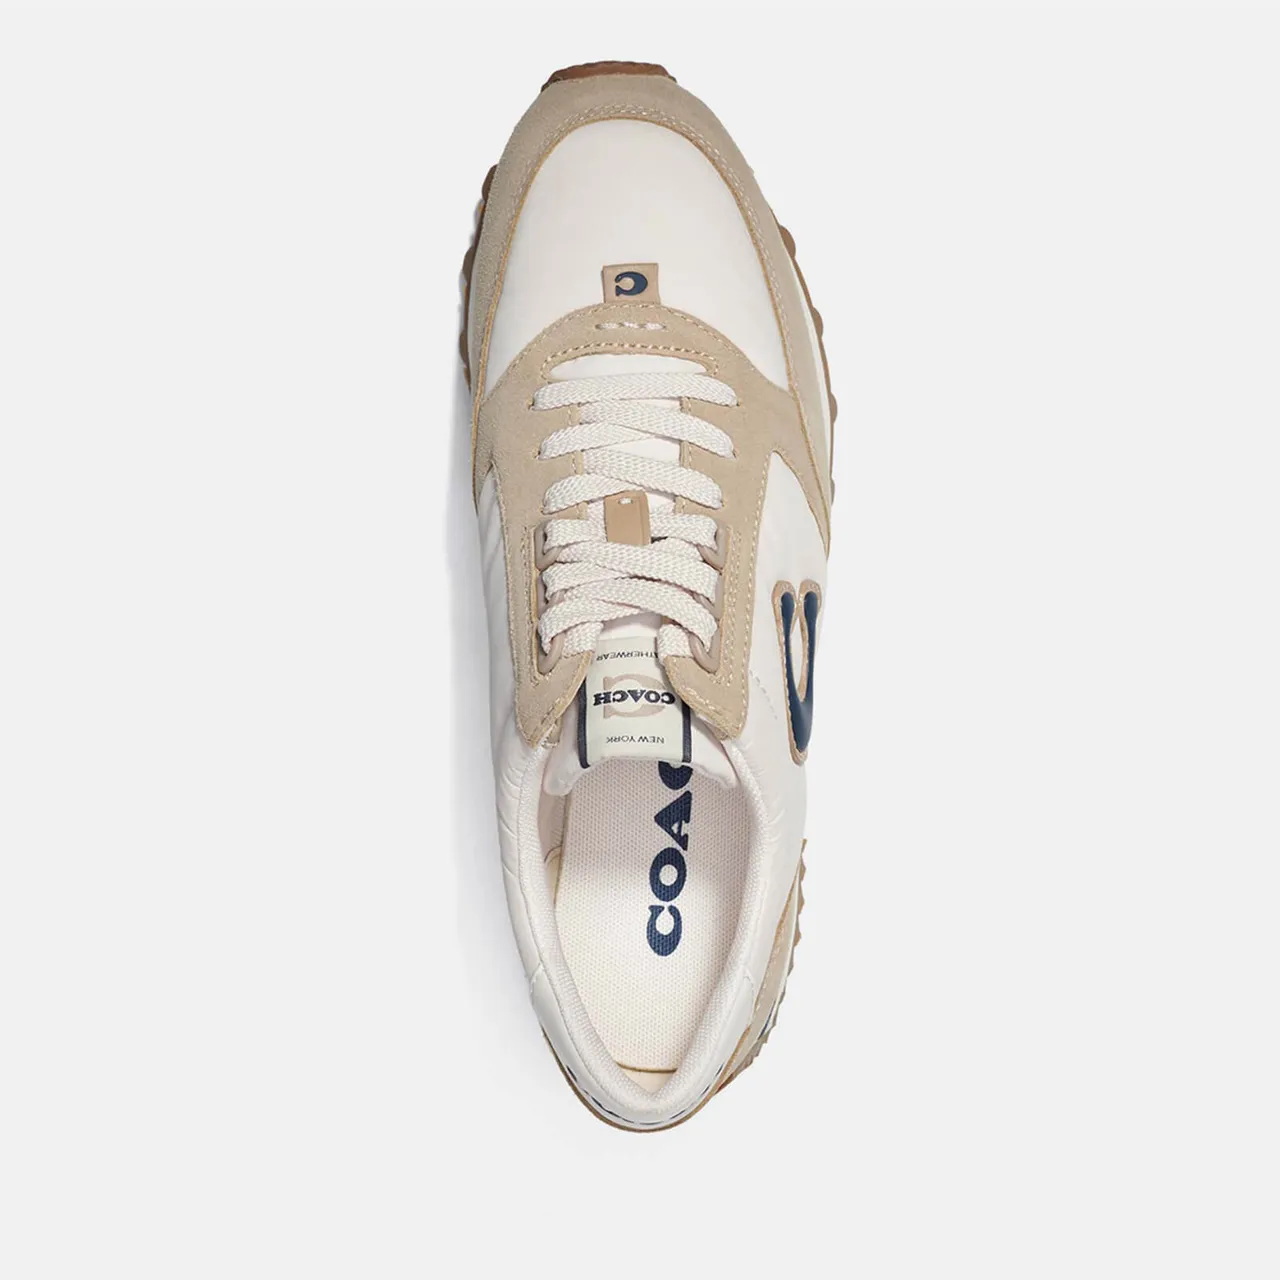 Coach Women's Suede, Shell and Leather Trainers - UK